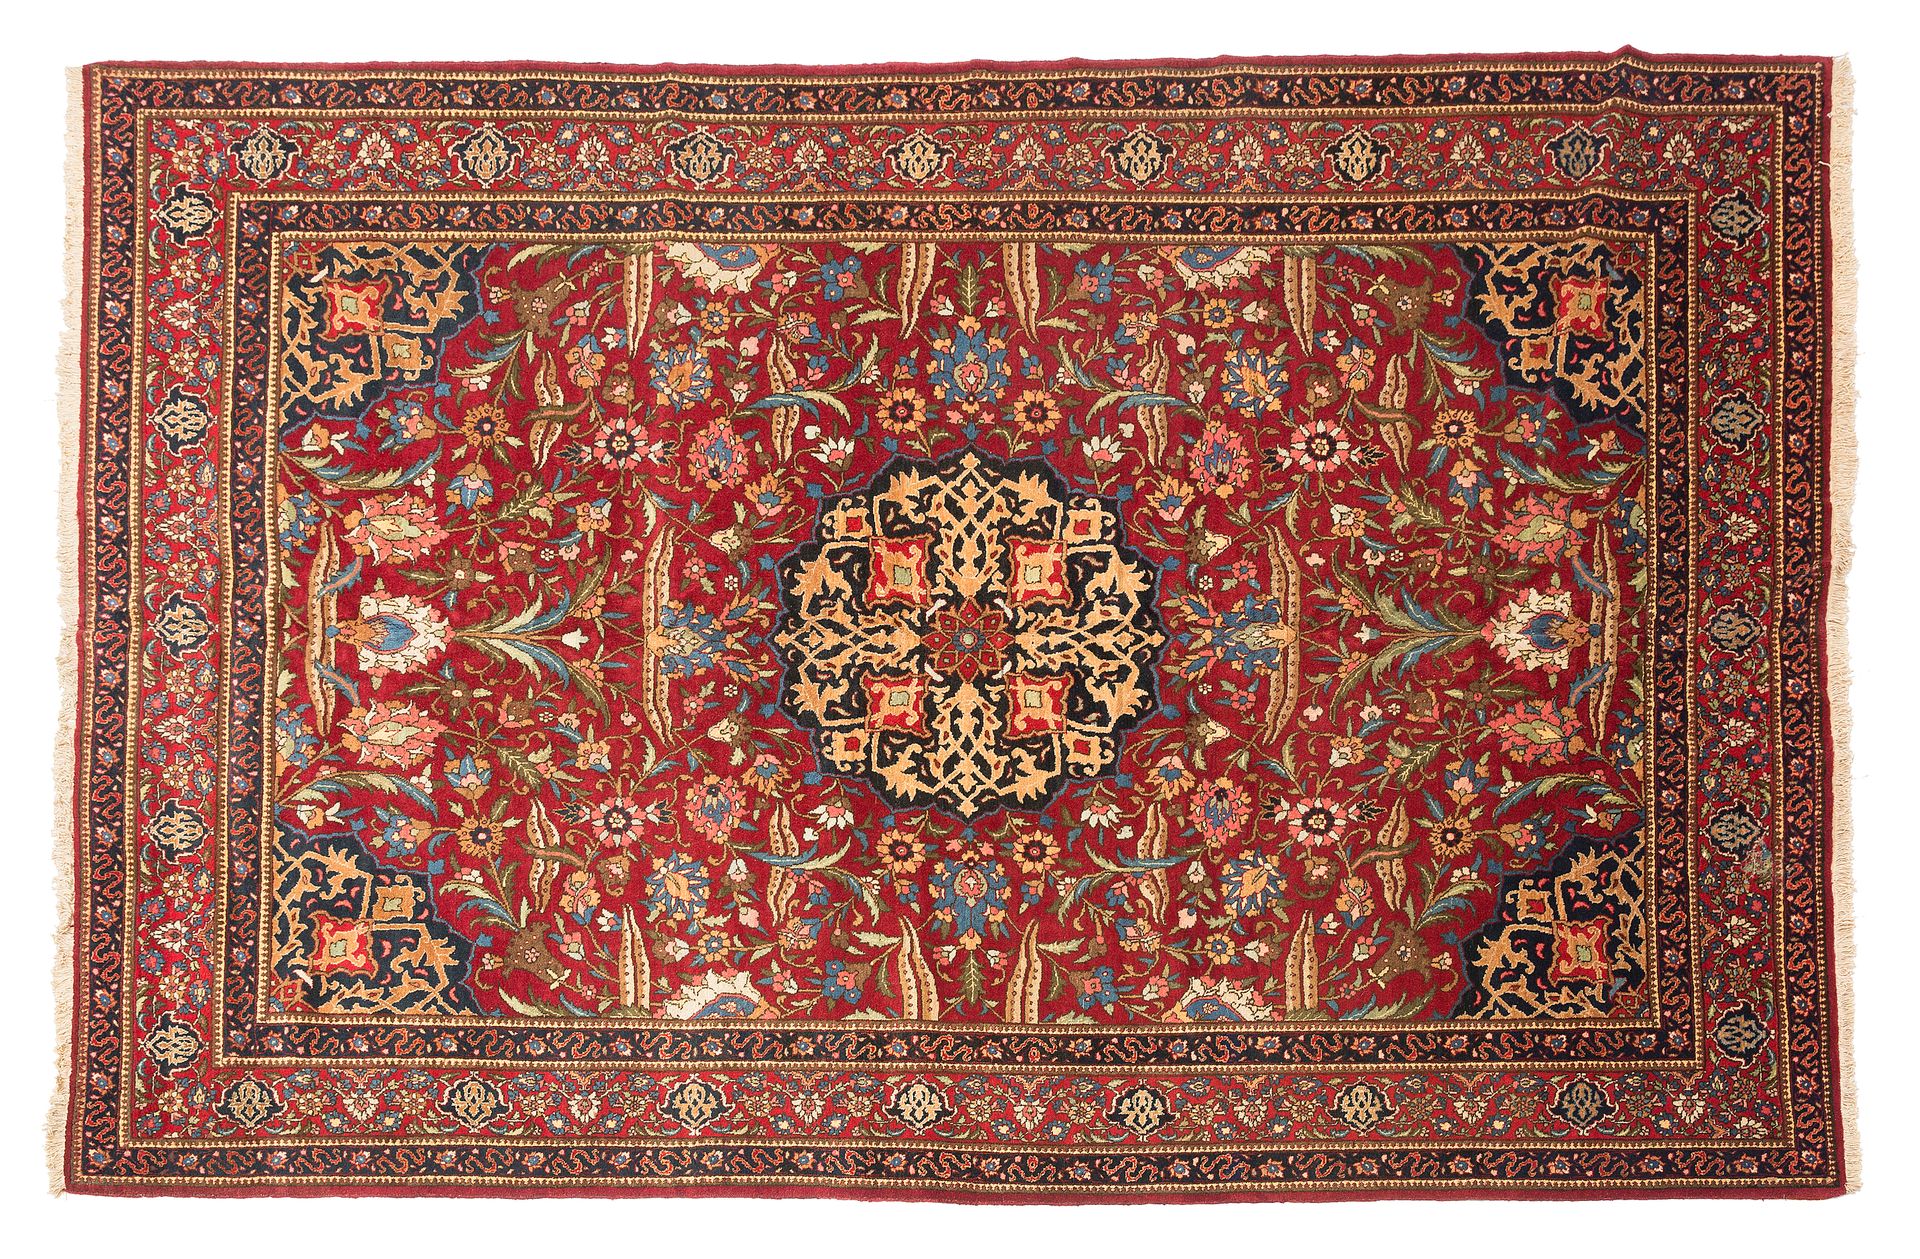 Null TABRIZ carpet (Persia), 1st third of the 20th century

Dimensions : 400 x 3&hellip;